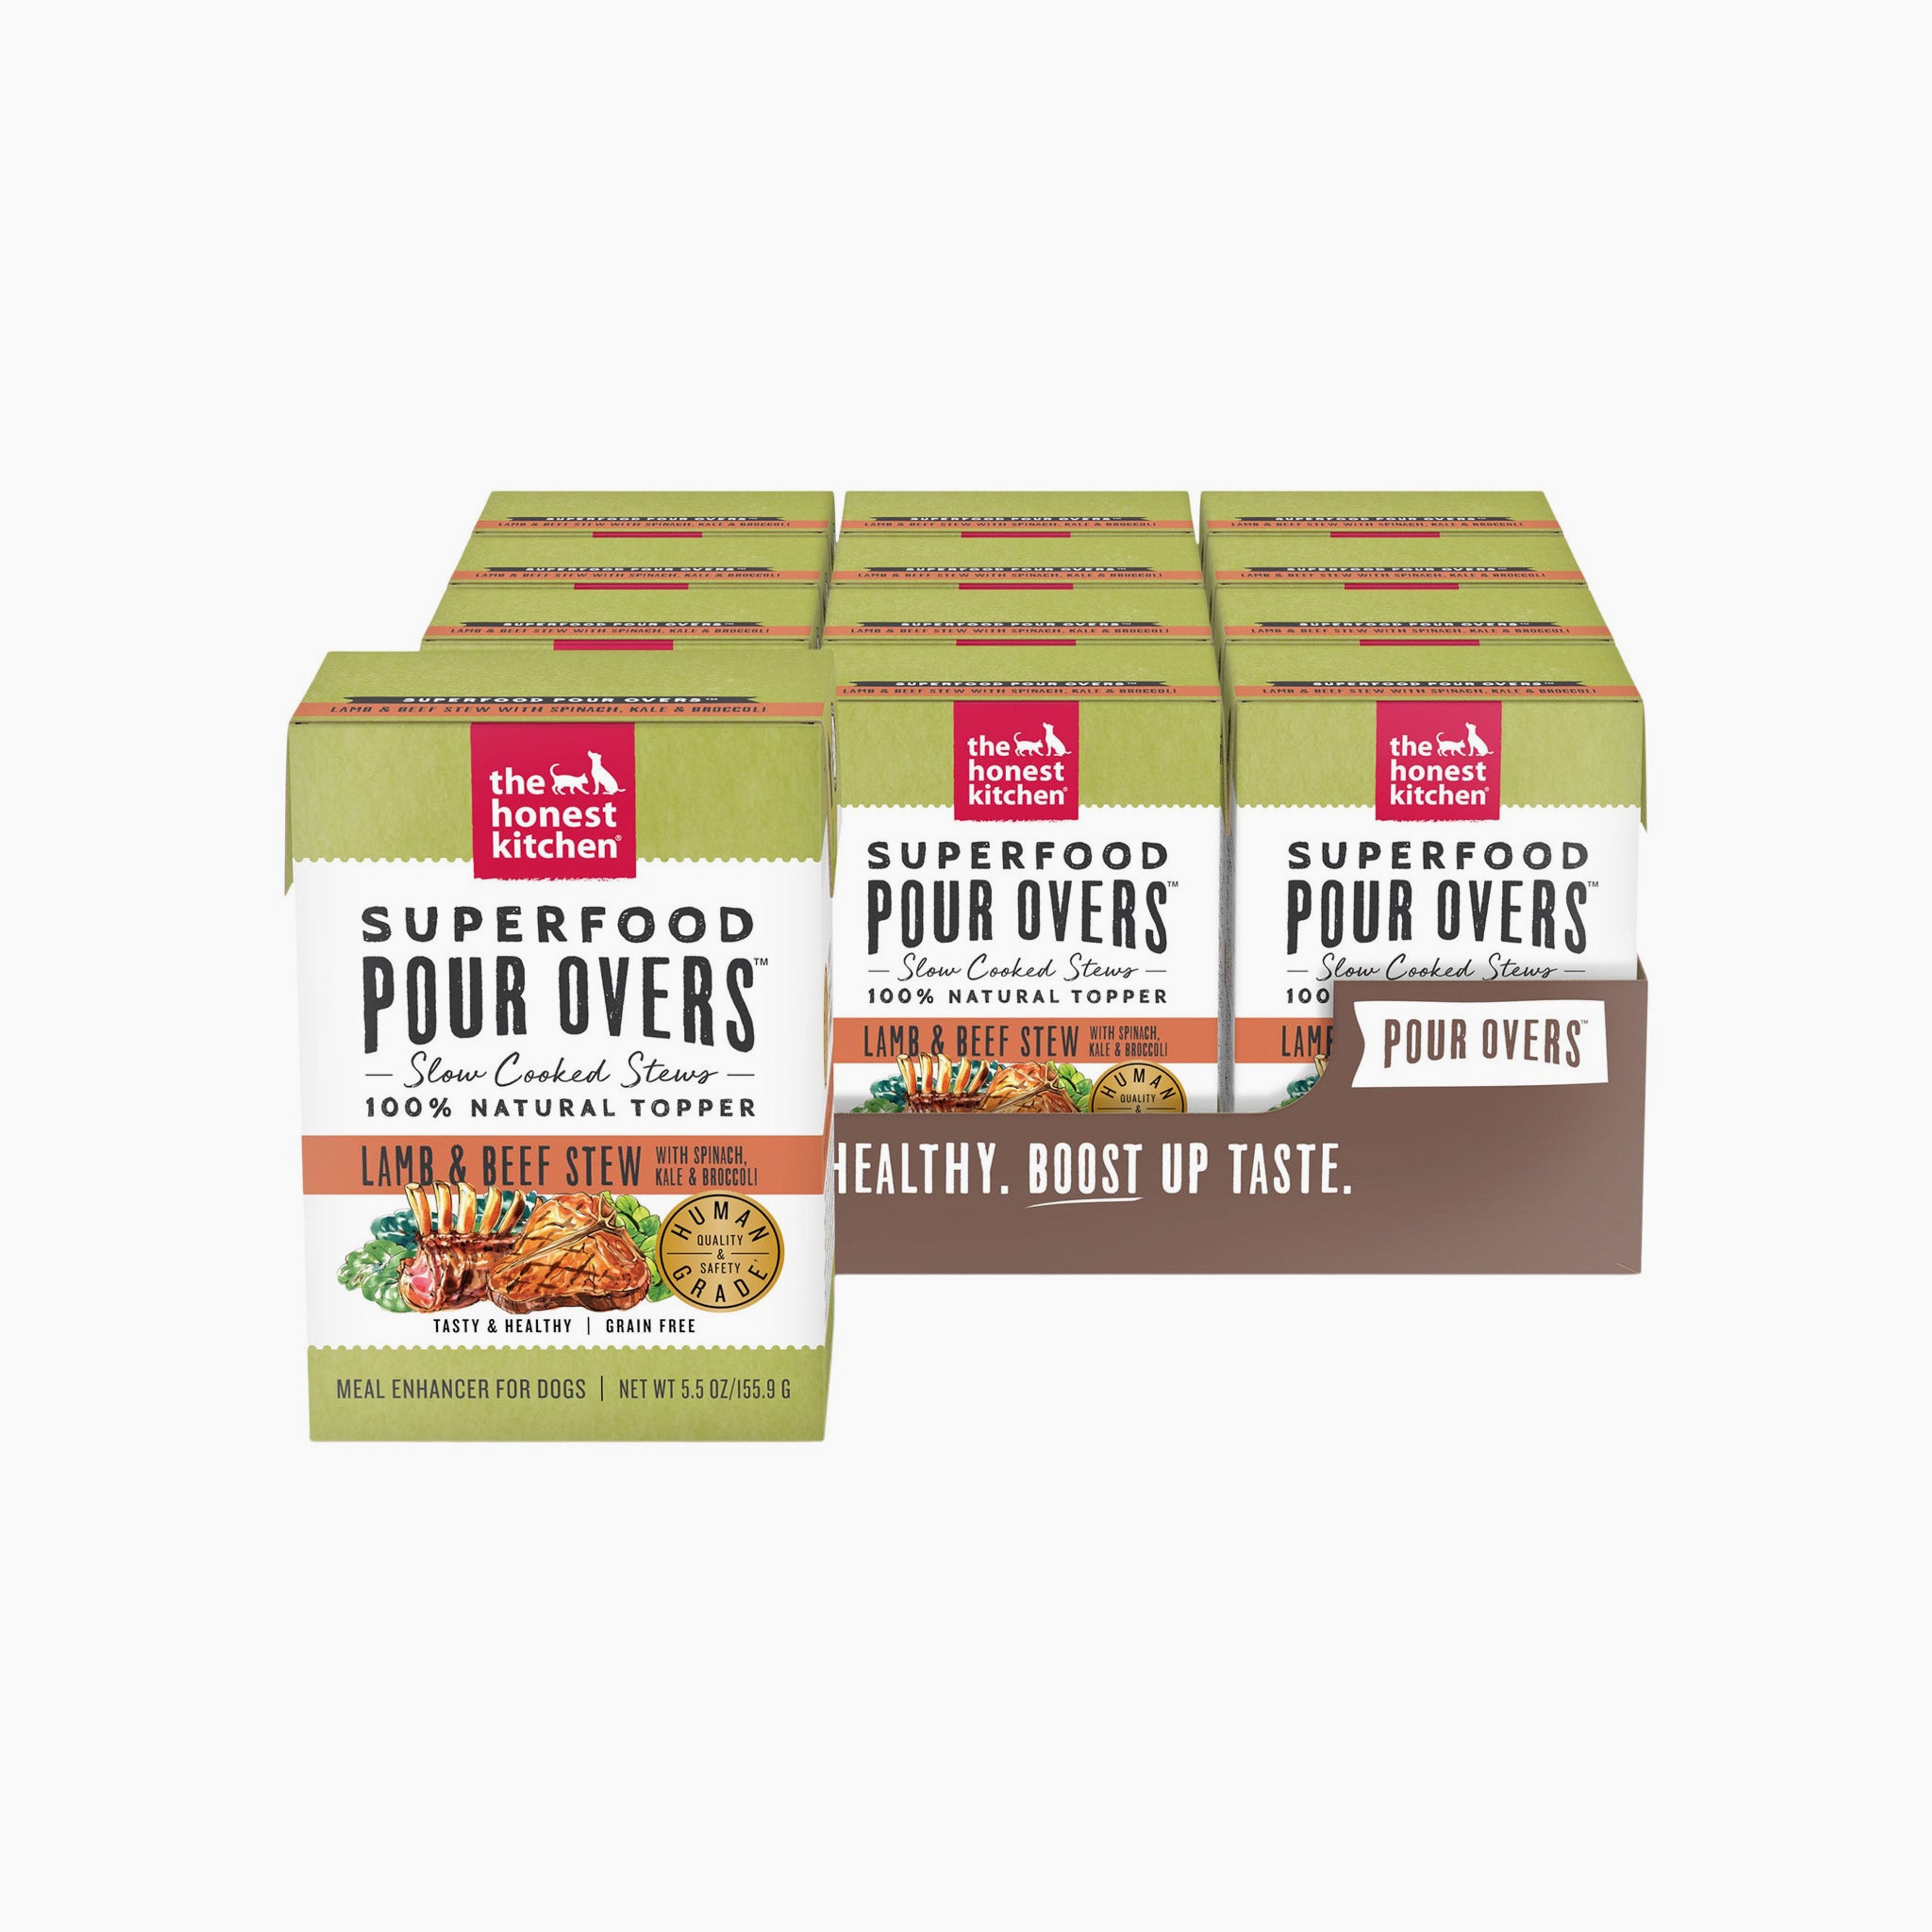 The Honest Kitchen Superfood Bone Broth Pour Overs and Meal Enhancer for Dogs